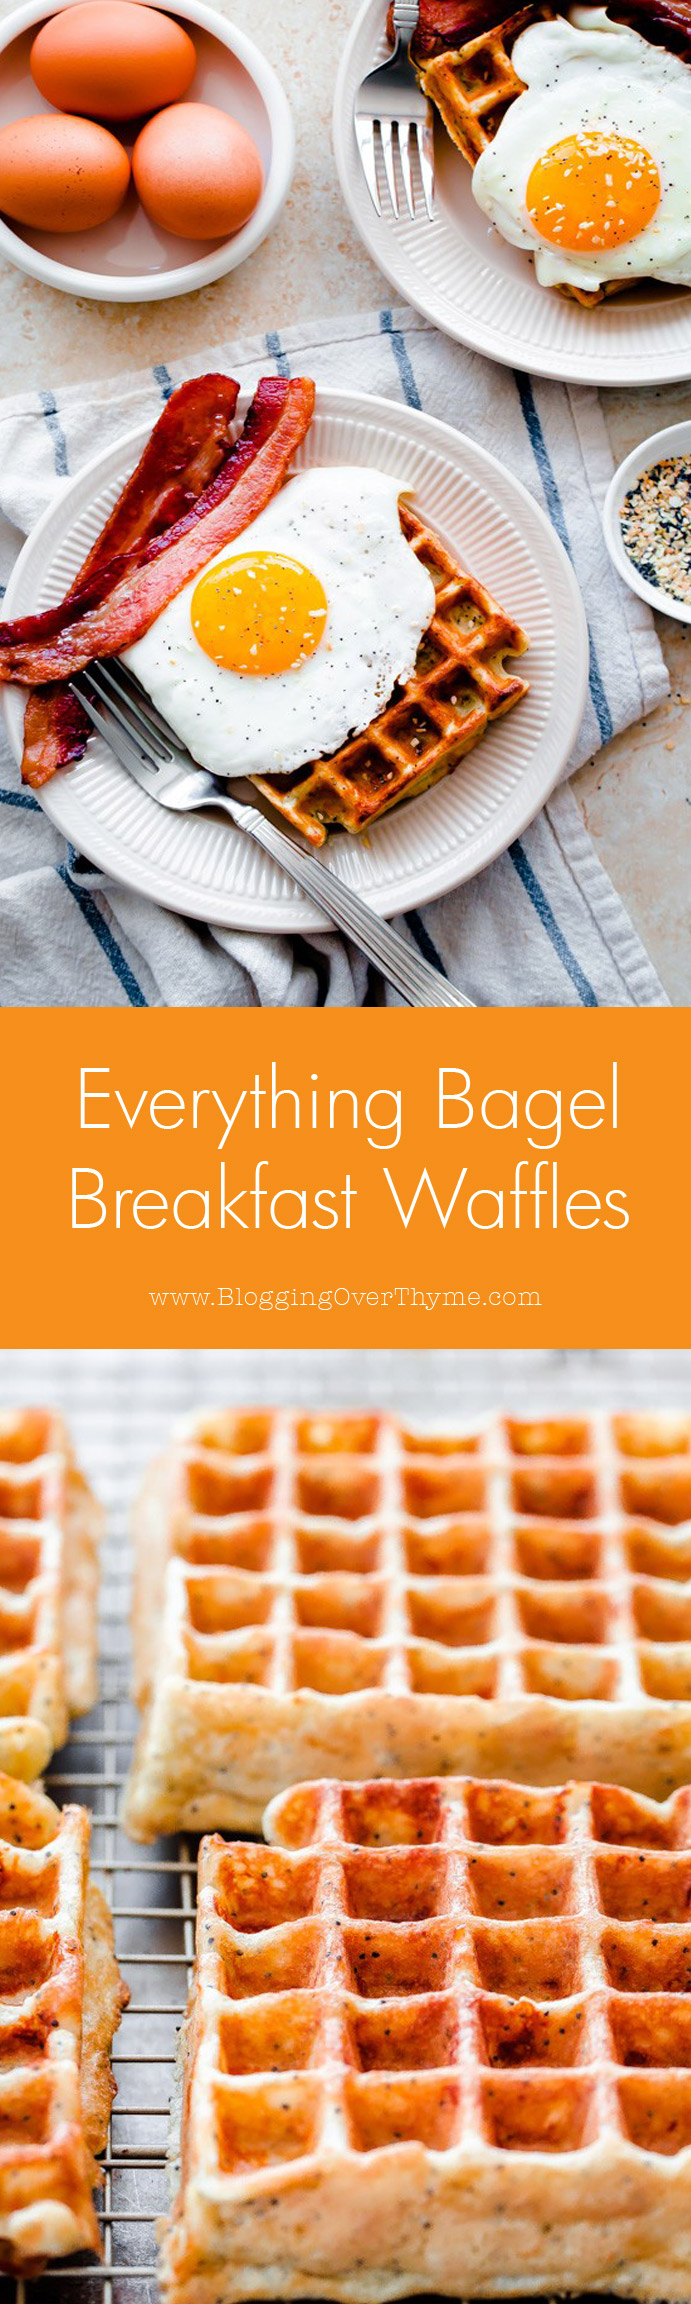 Everything Bagel Breakfast Waffles. Topped with sunny-side eggs and crispy bacon!